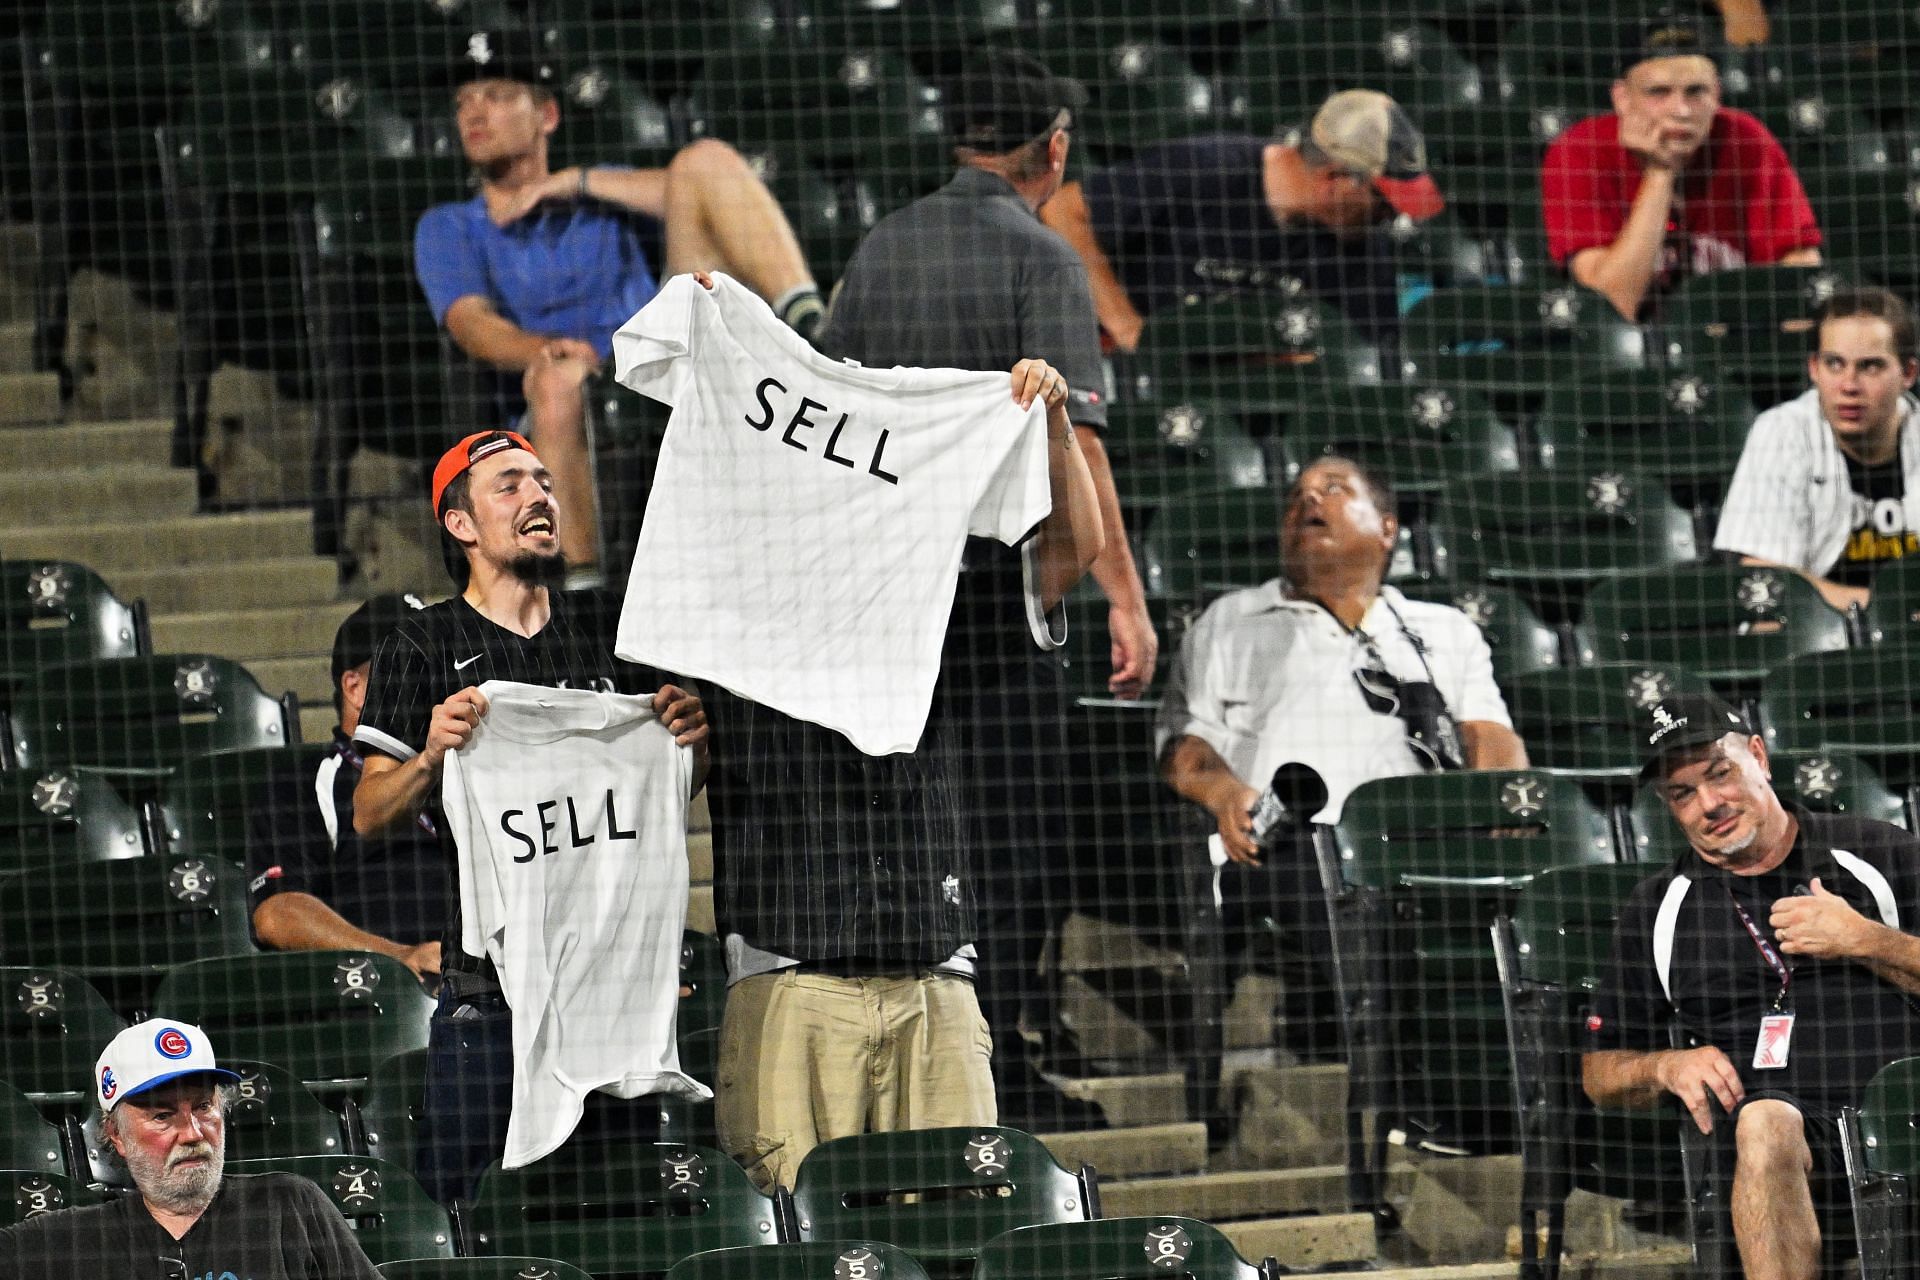 Athletics fans have protested